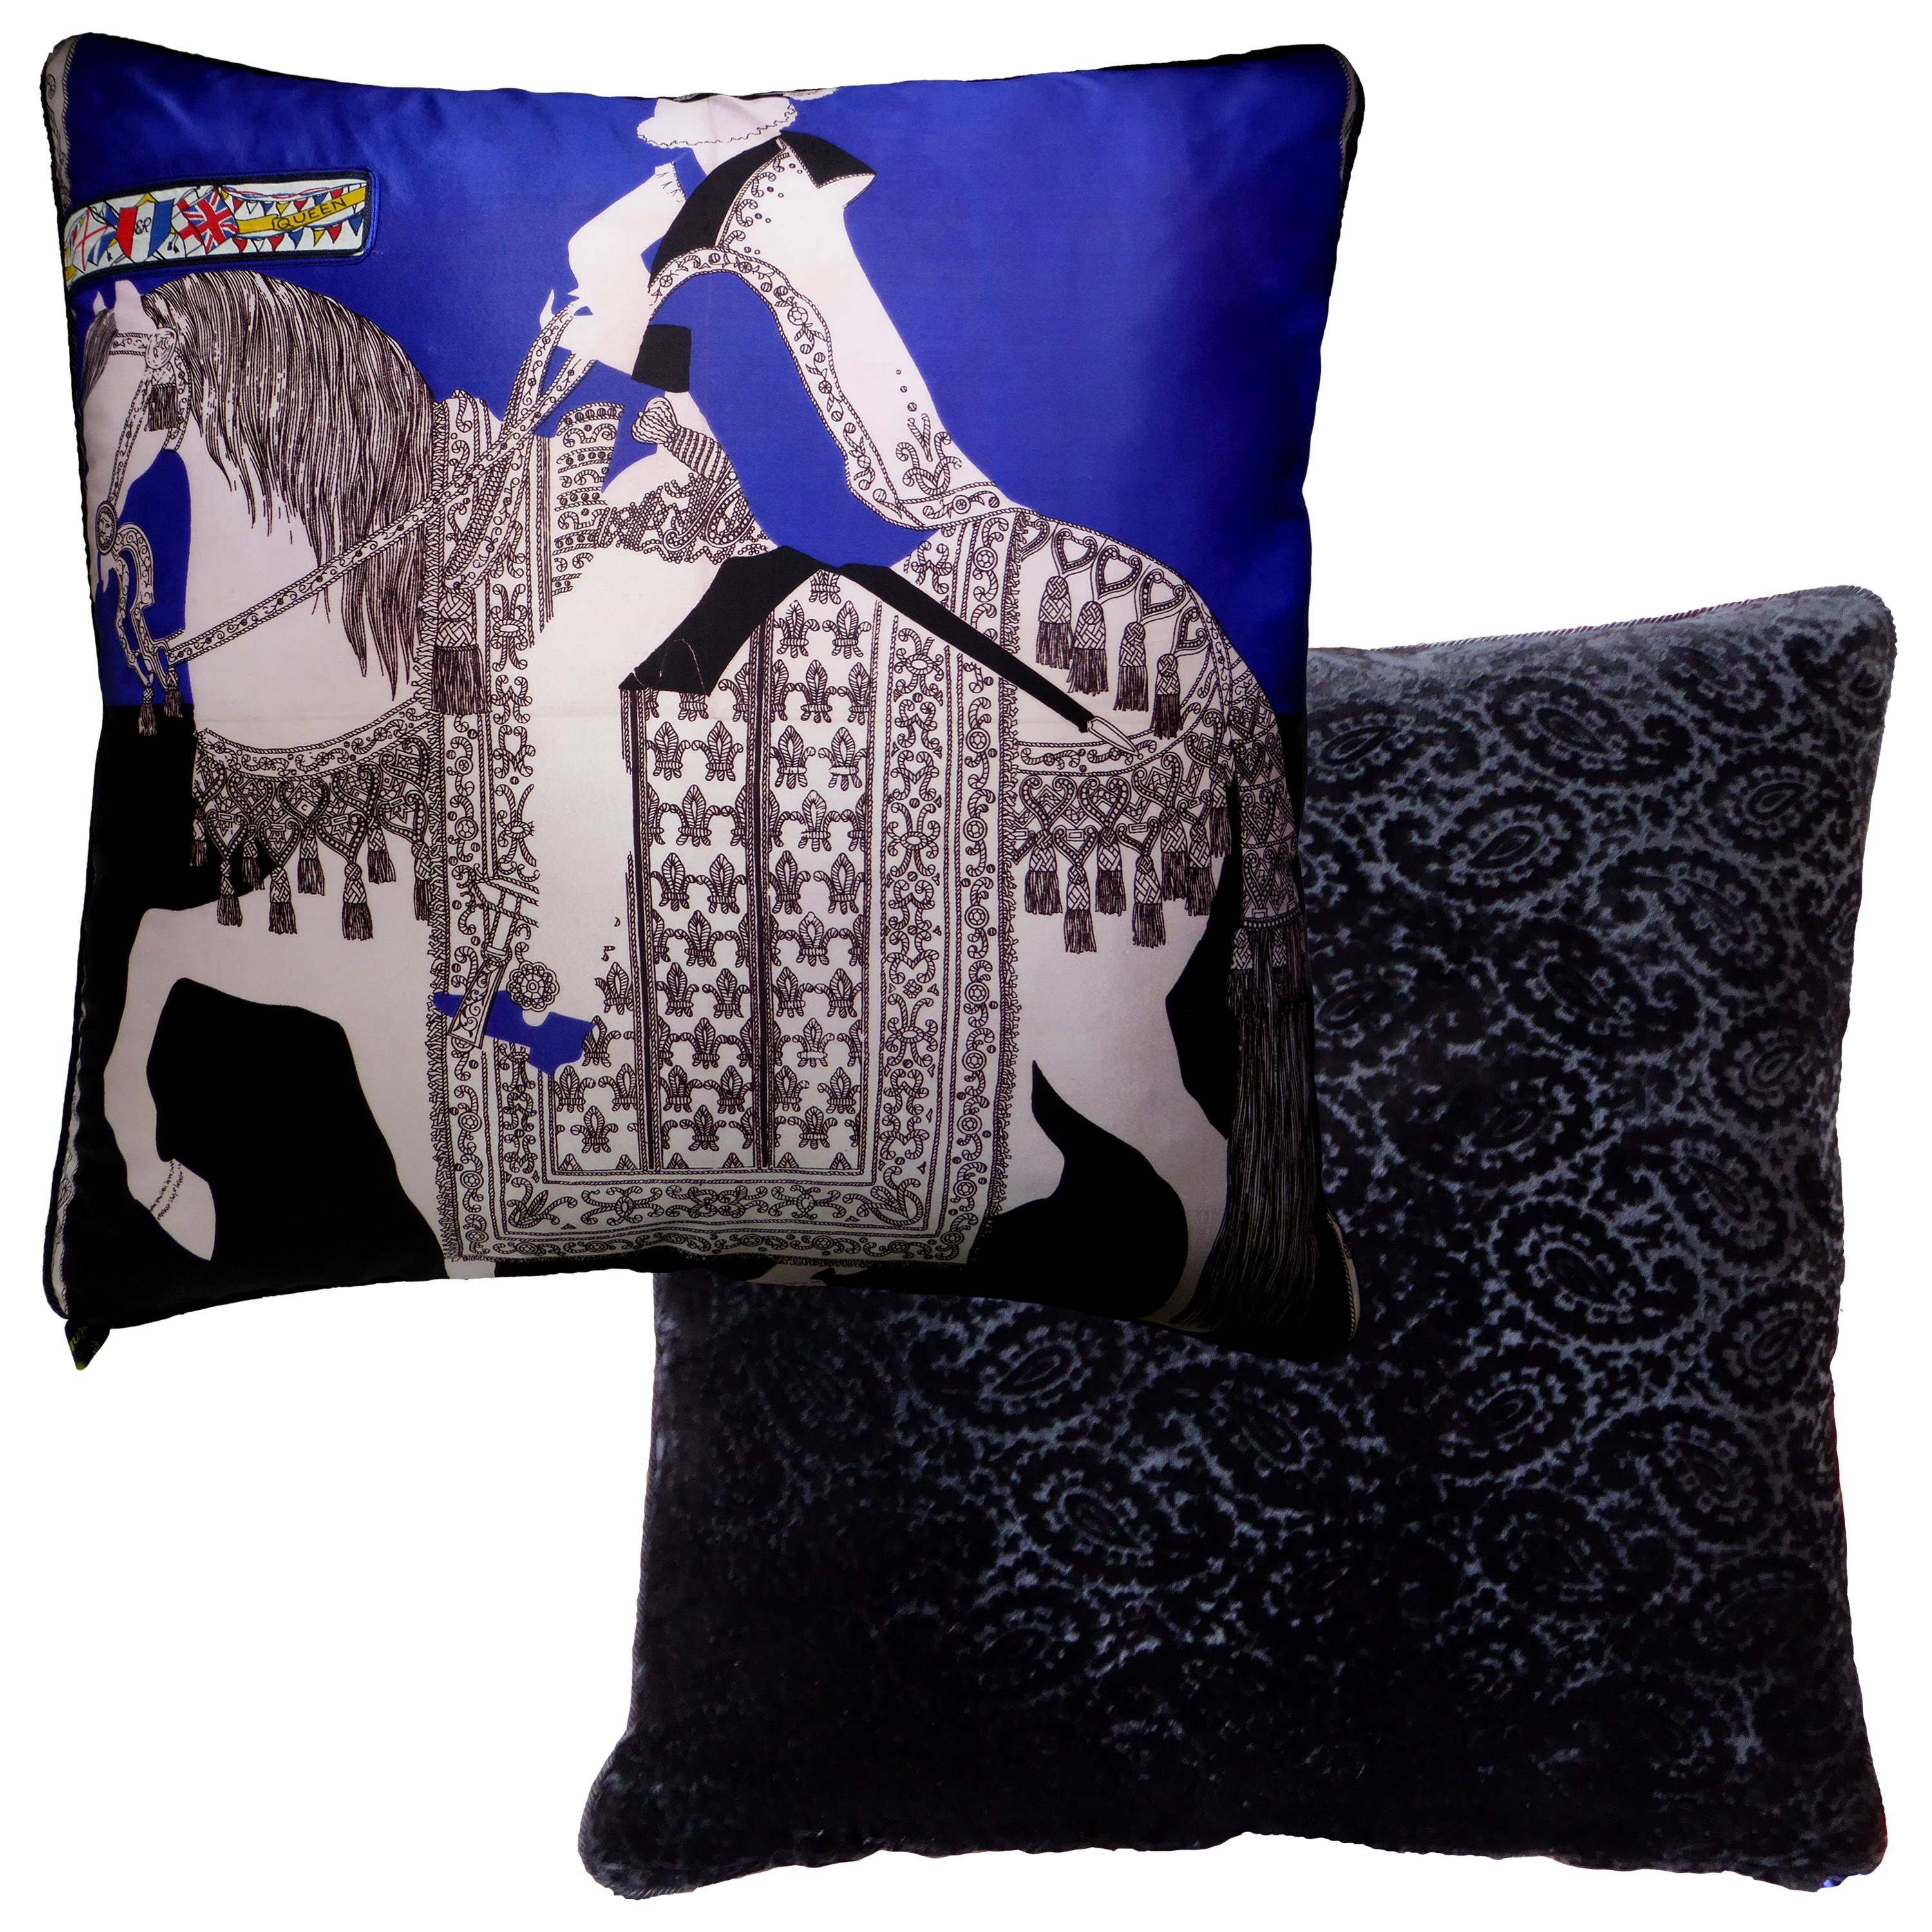 Mid-Century Modern 'Vintage Cushions', Luxury Bespoke-Made Pillow 'Medieval Pageant' British Made